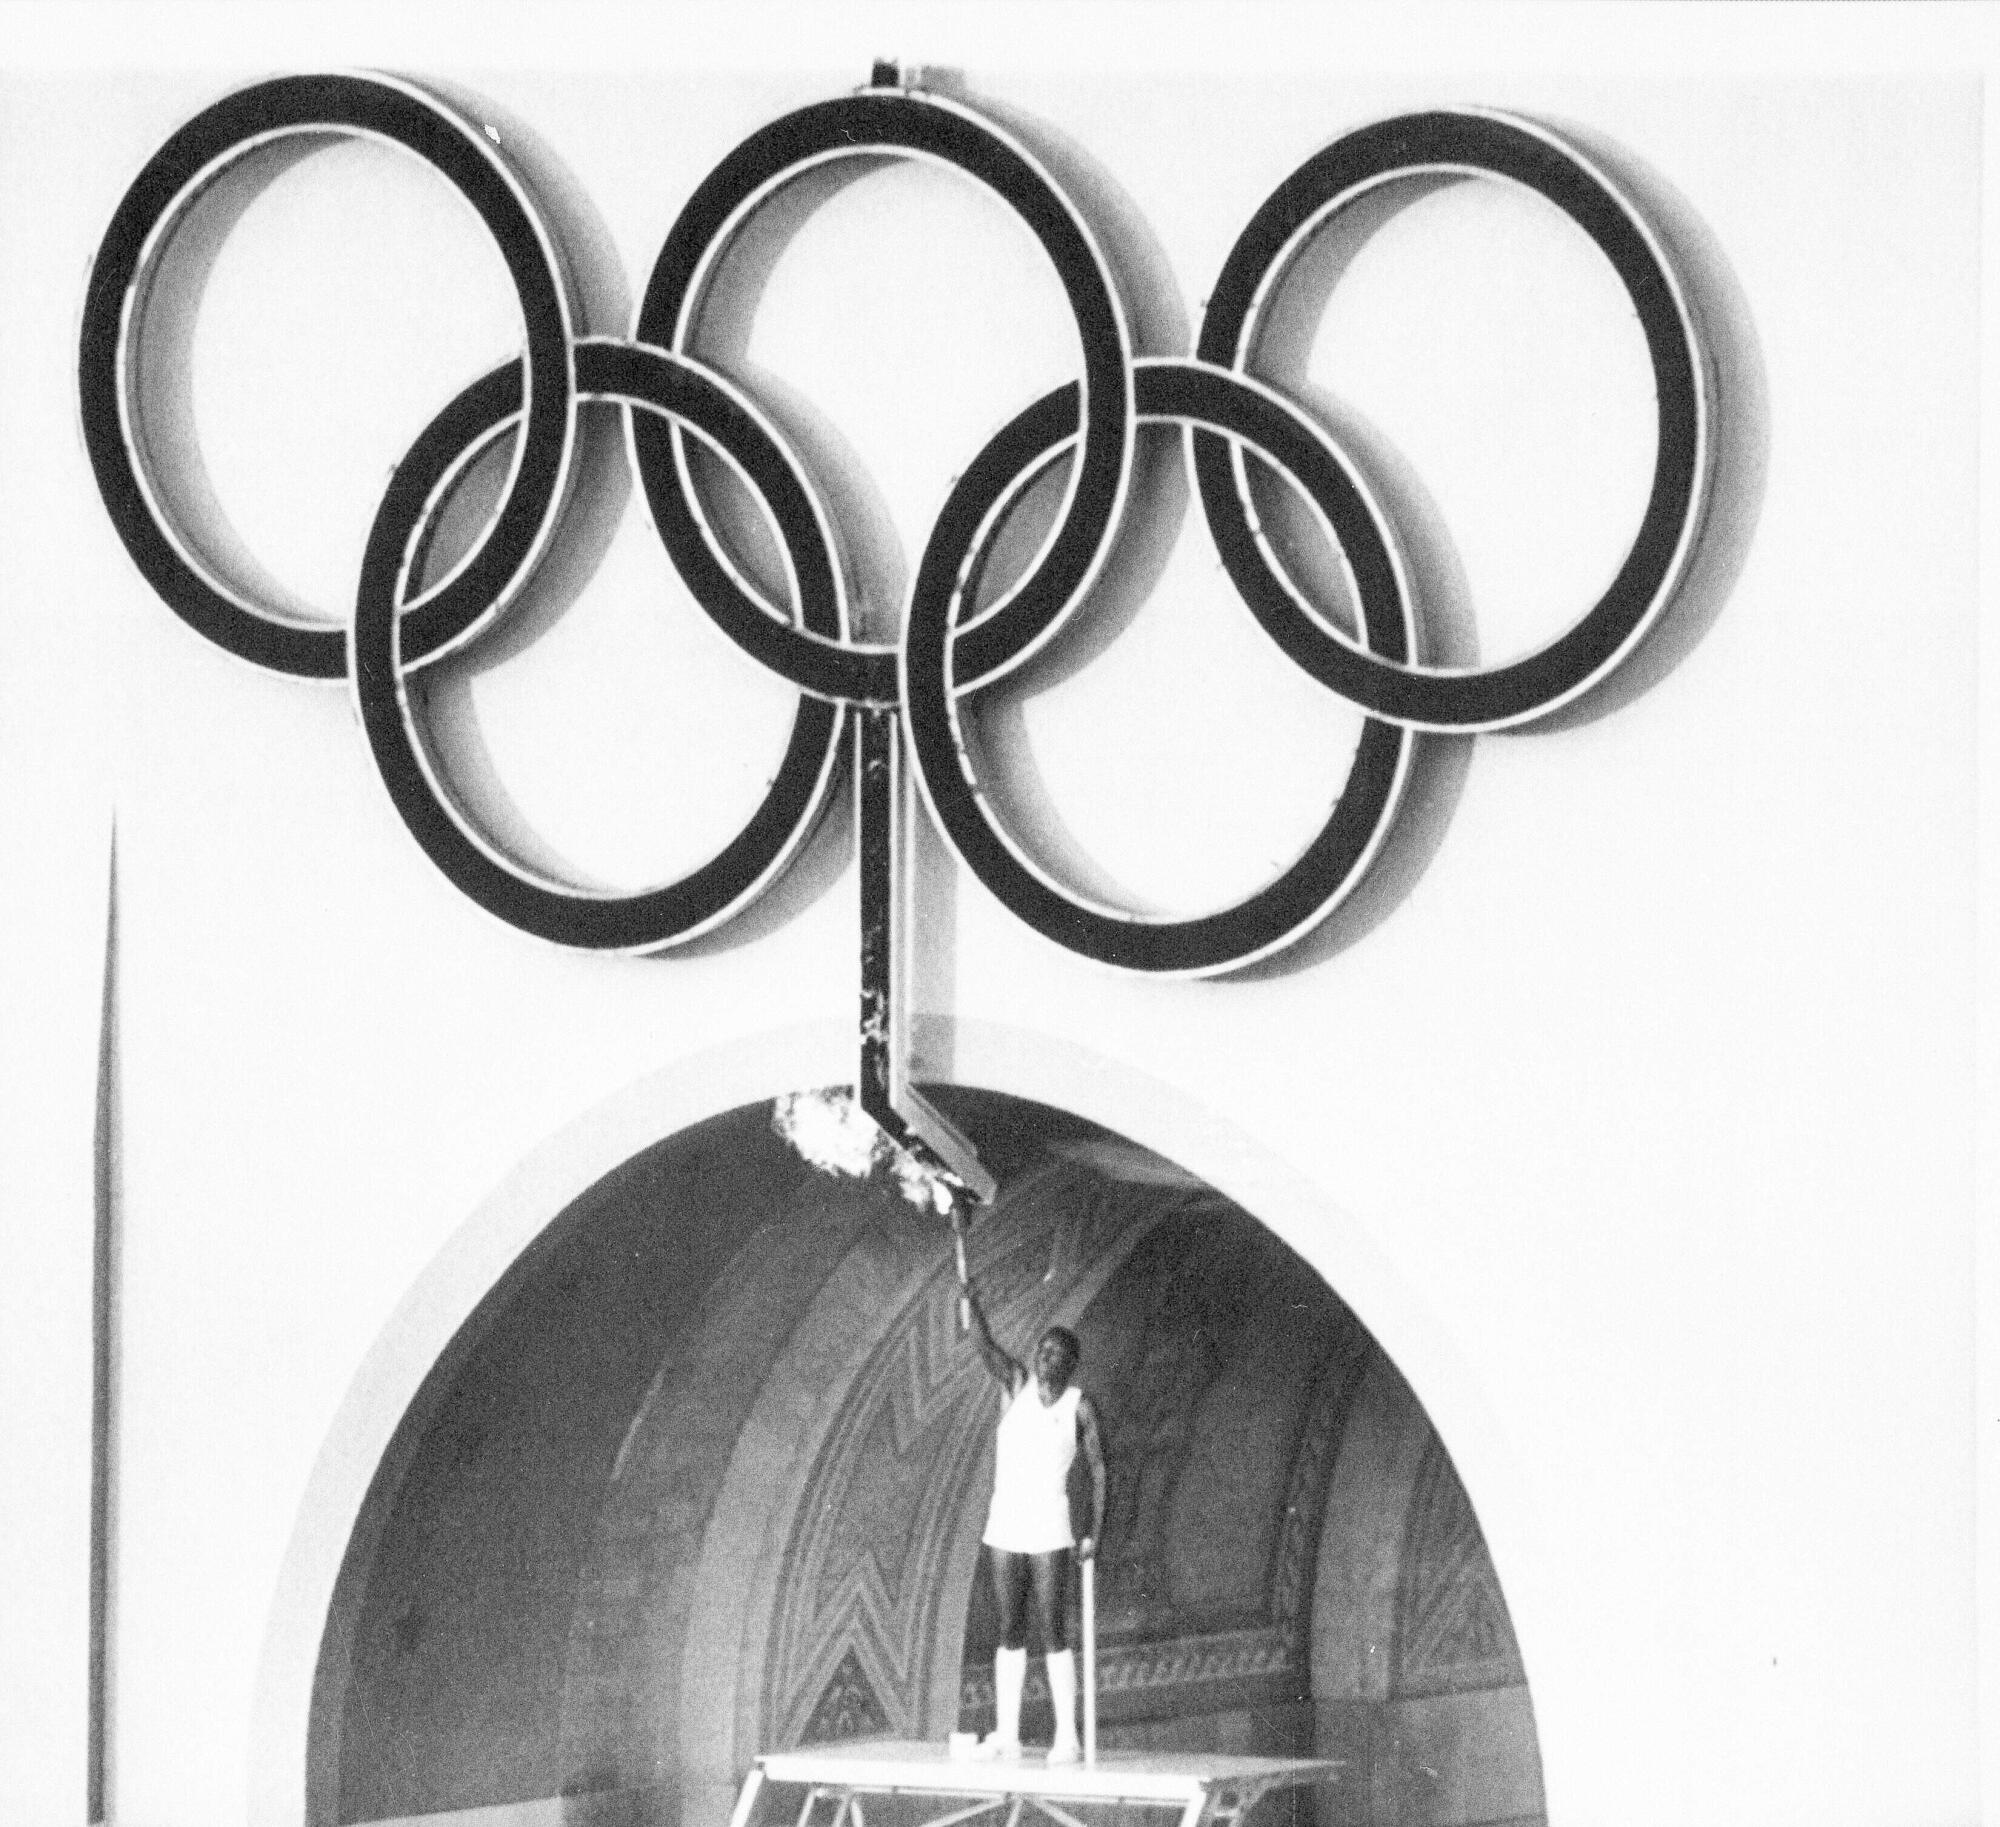 Rafer Johnson lights the Olympic torch during opening ceremonies in 1984.